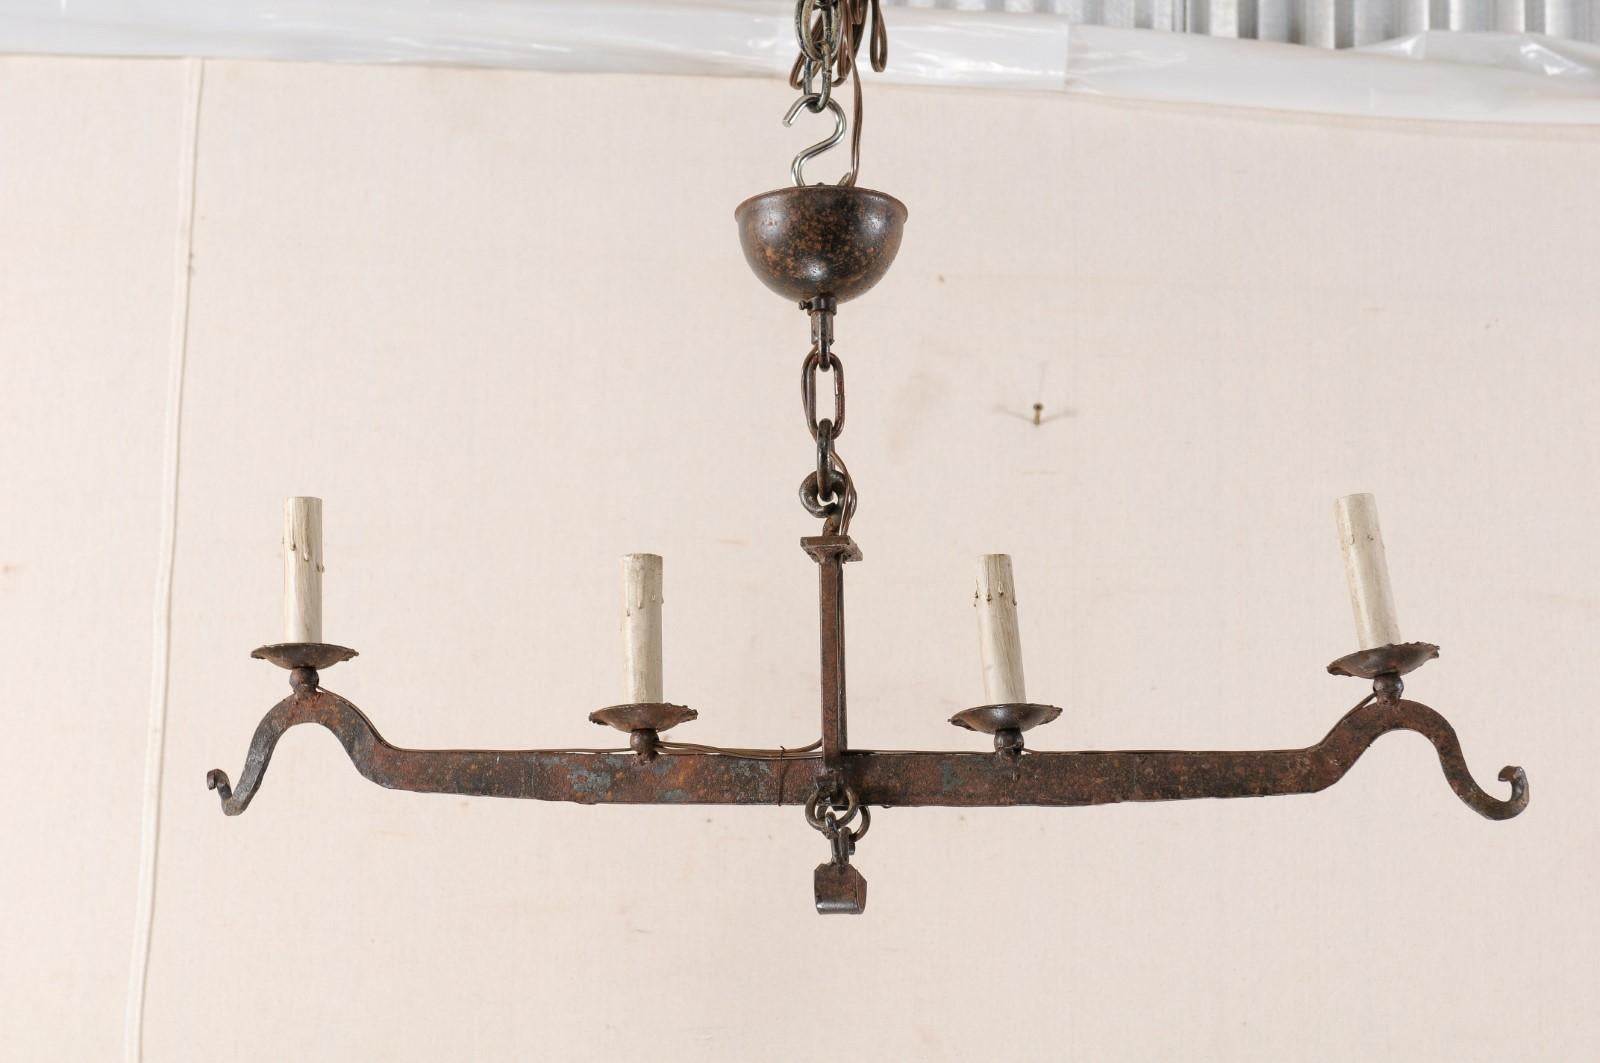 A midcentury French iron scale four-light chandelier. This vintage chandelier from France features an elongated central bar, which is part of an old scale, with hooked ends, and connected to top at center with a caged ridged double bar post. Four